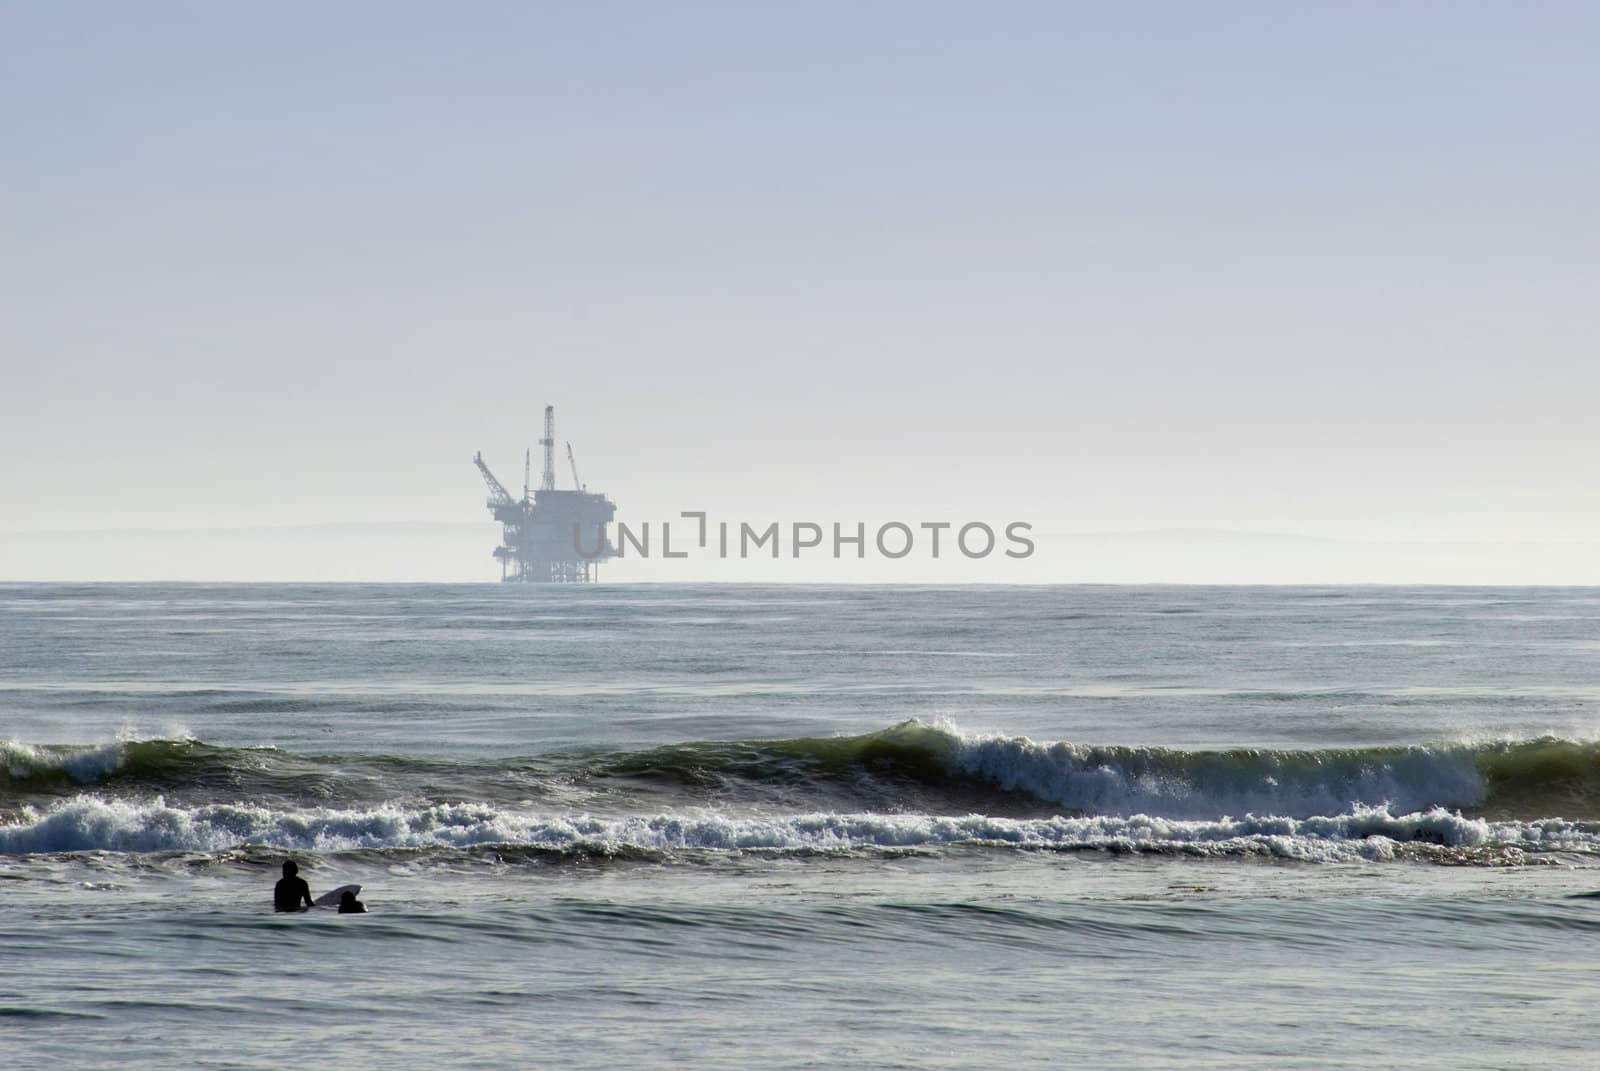 An off-shore oil platform on the pacific coast, off California